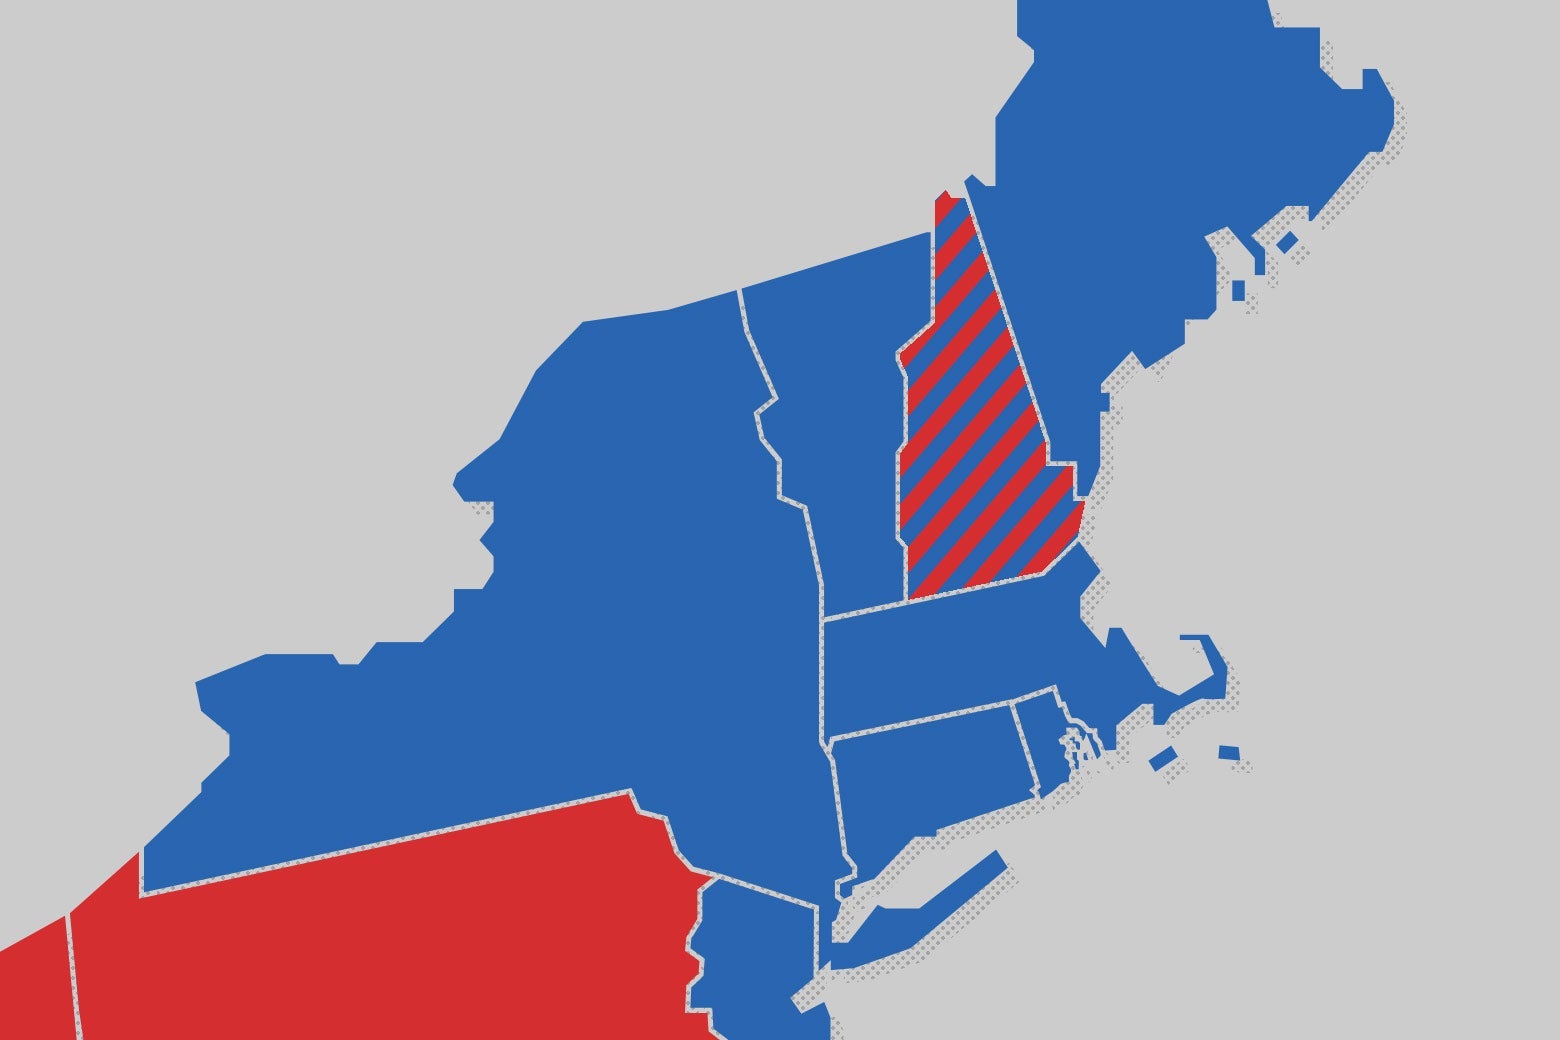 A map of the Northeast U.S. with states colored in red and blue. New Hampshire is striped red and blue.